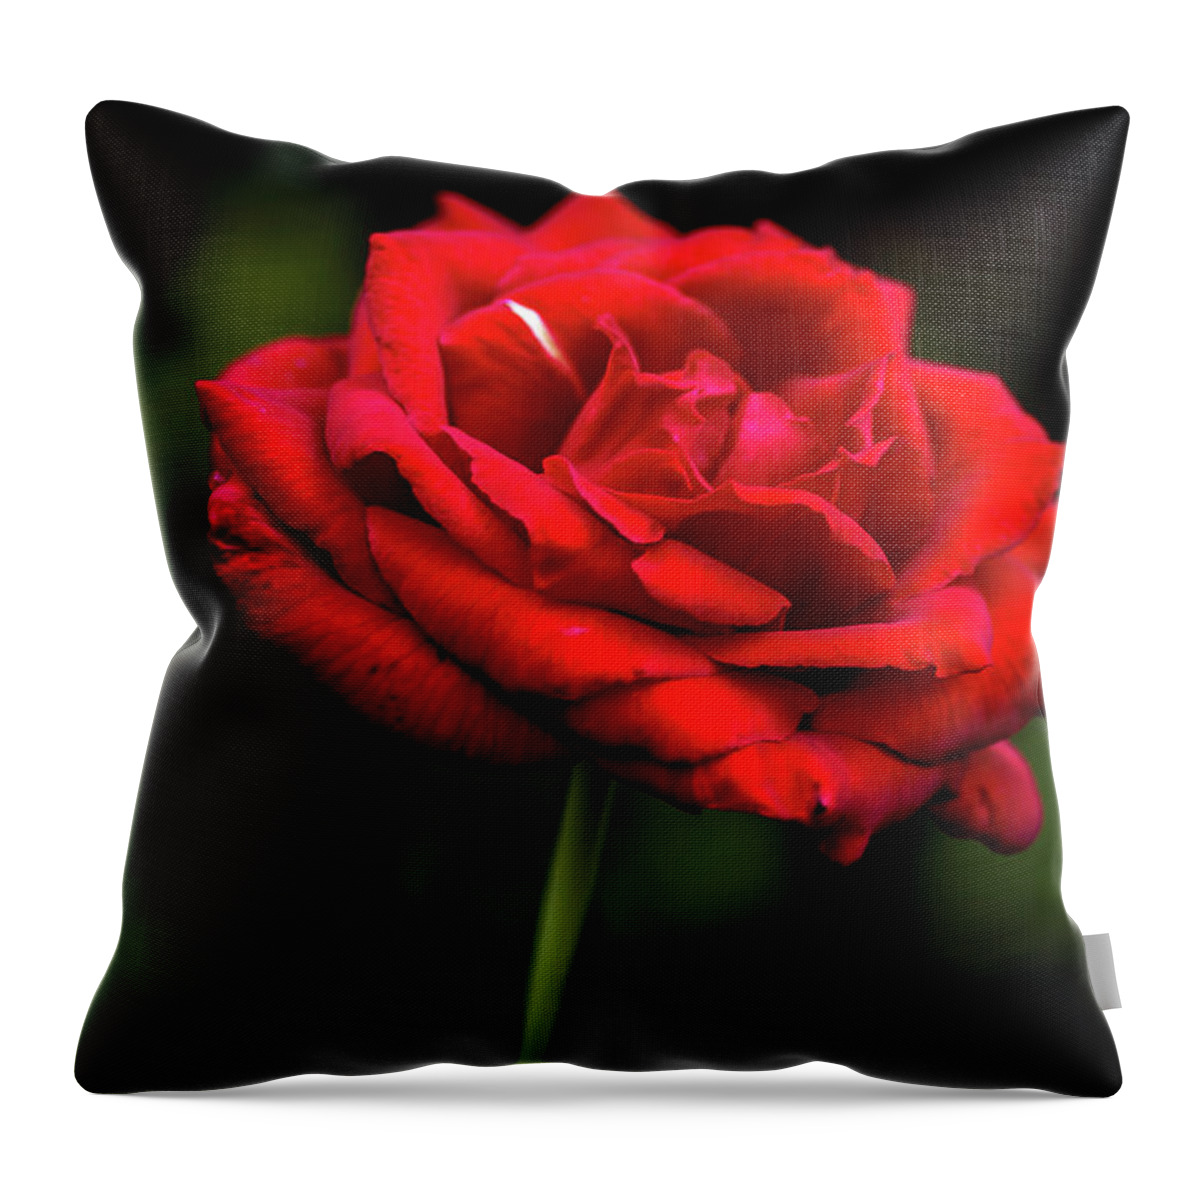 Flower Throw Pillow featuring the digital art Everlasting by Ed Stines